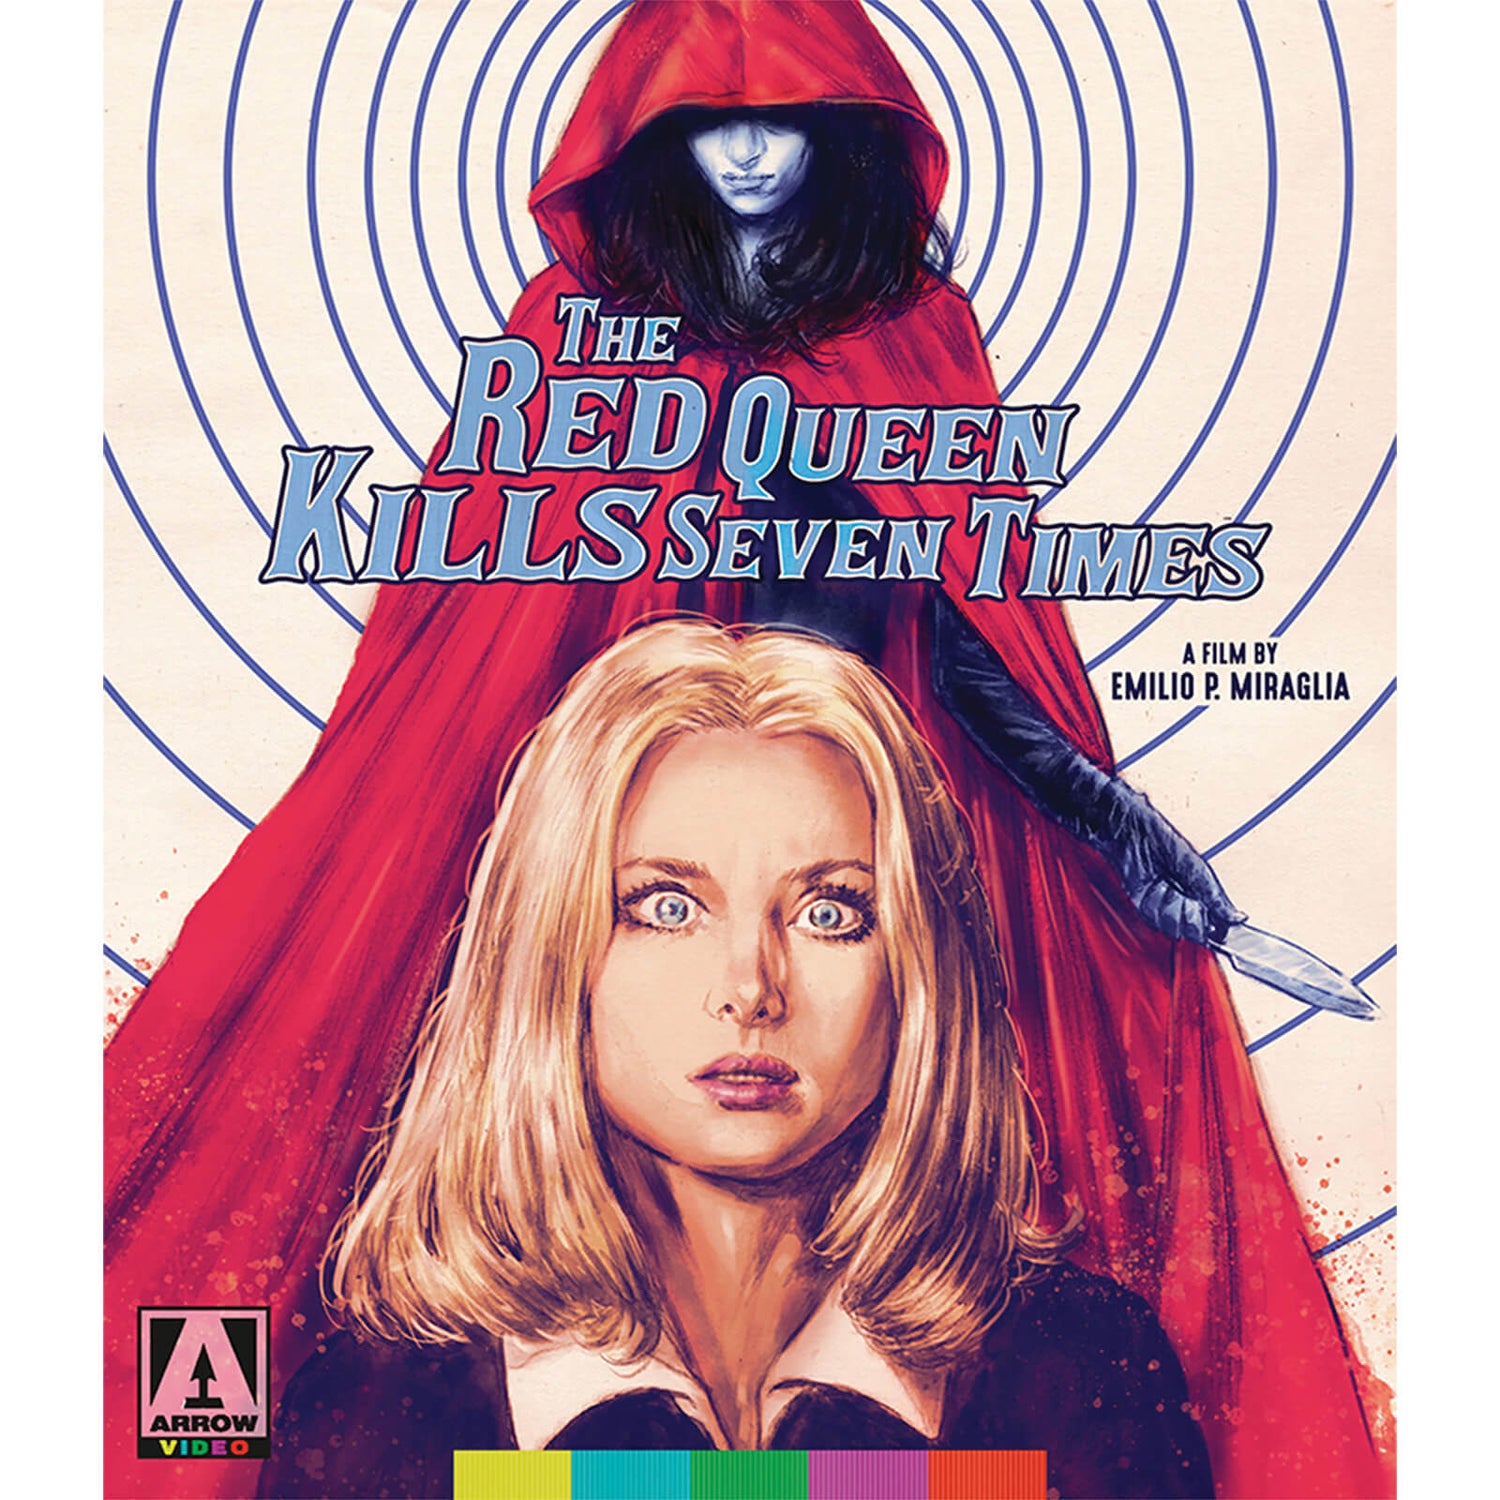 The Red Queen Kills Seven Times Blu-ray